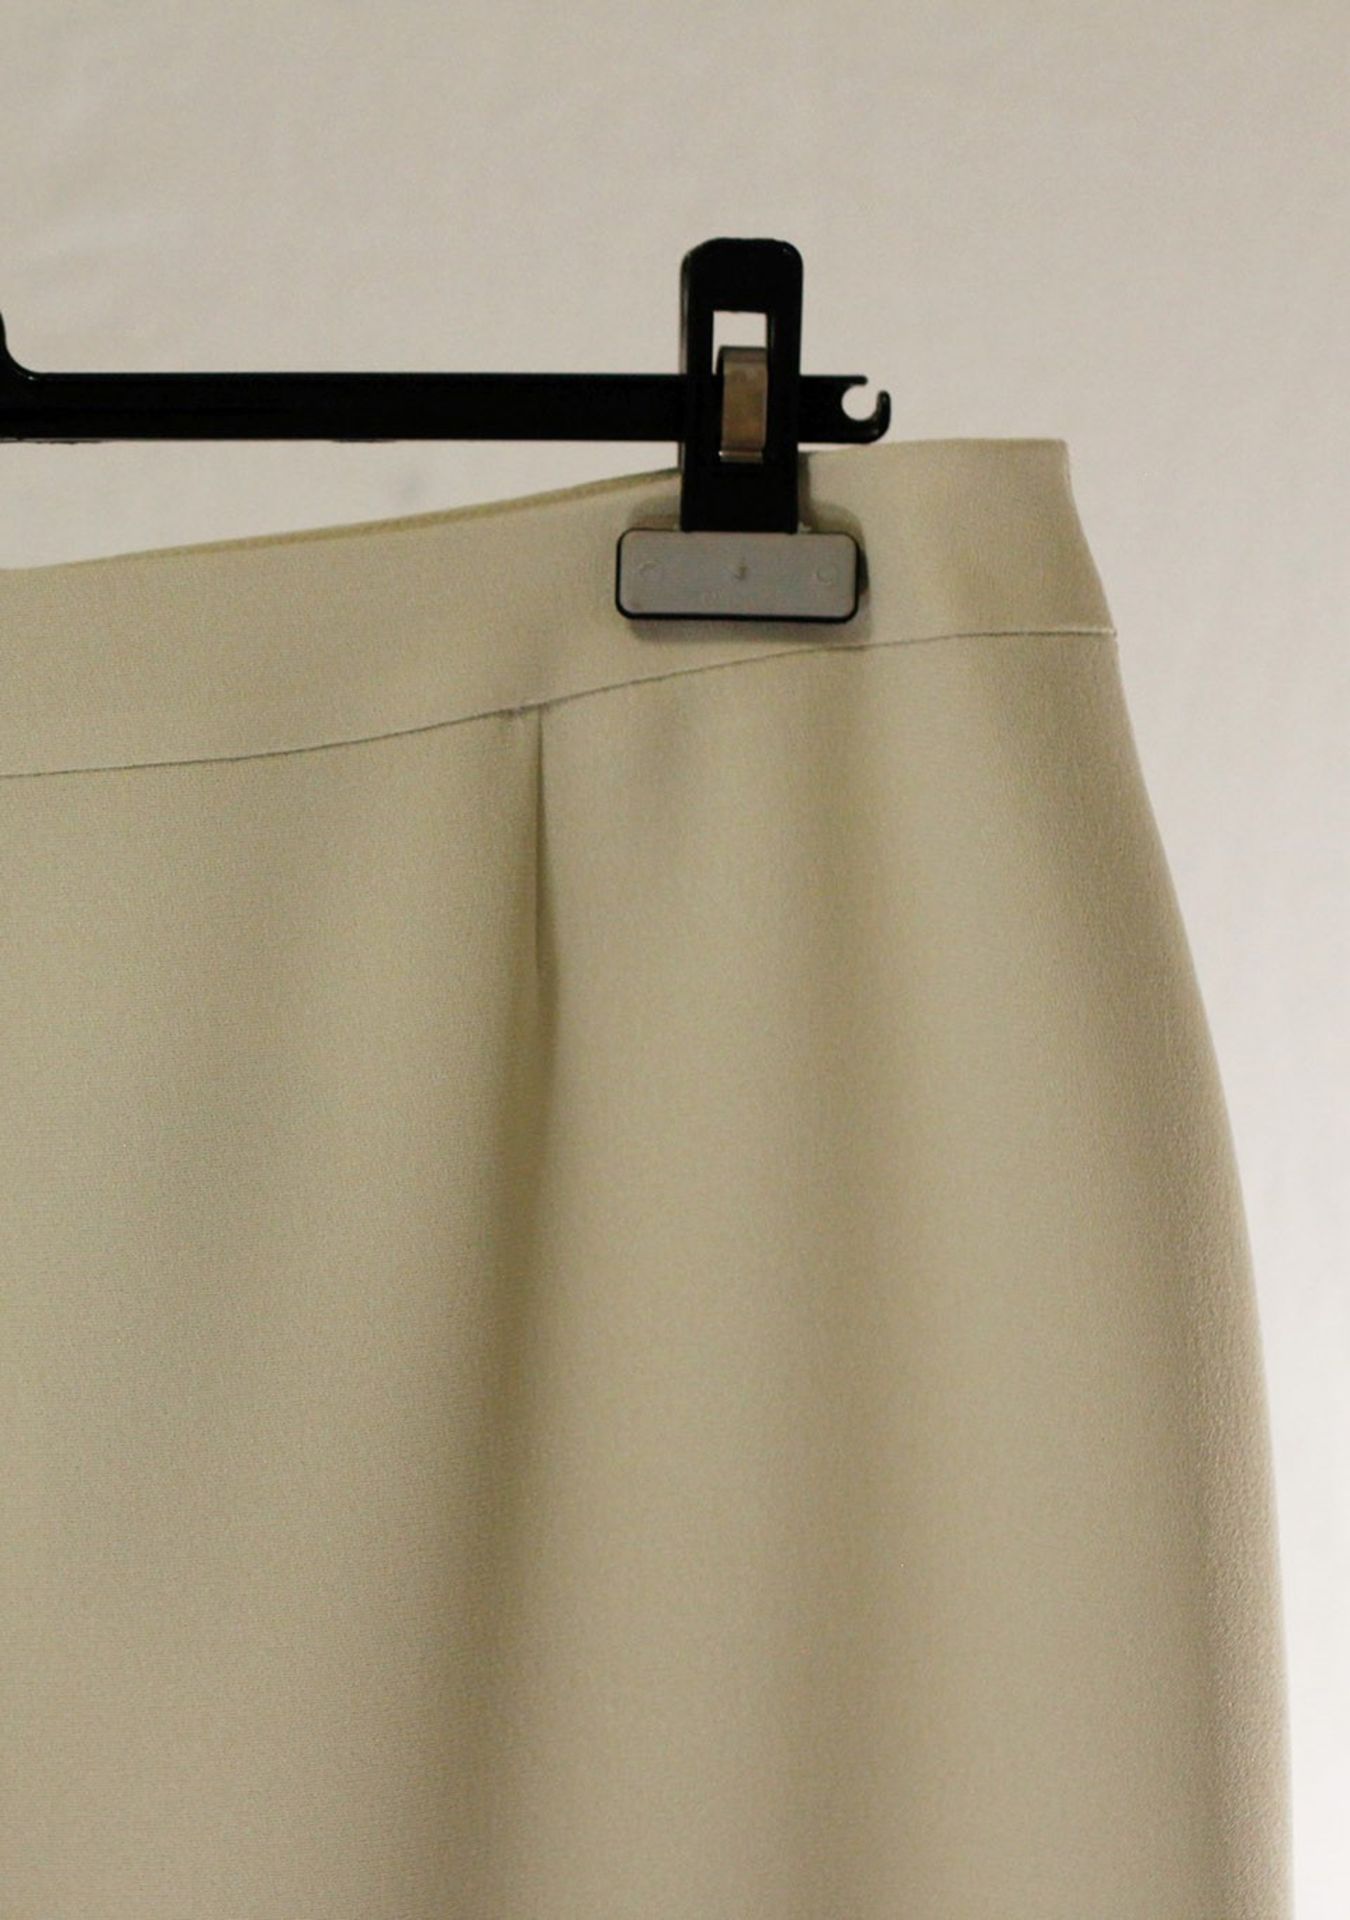 1 x Anne Belin Pistachio Skirt - Size: 16 - Material: 100% Polyester - From a High End Clothing - Image 3 of 11